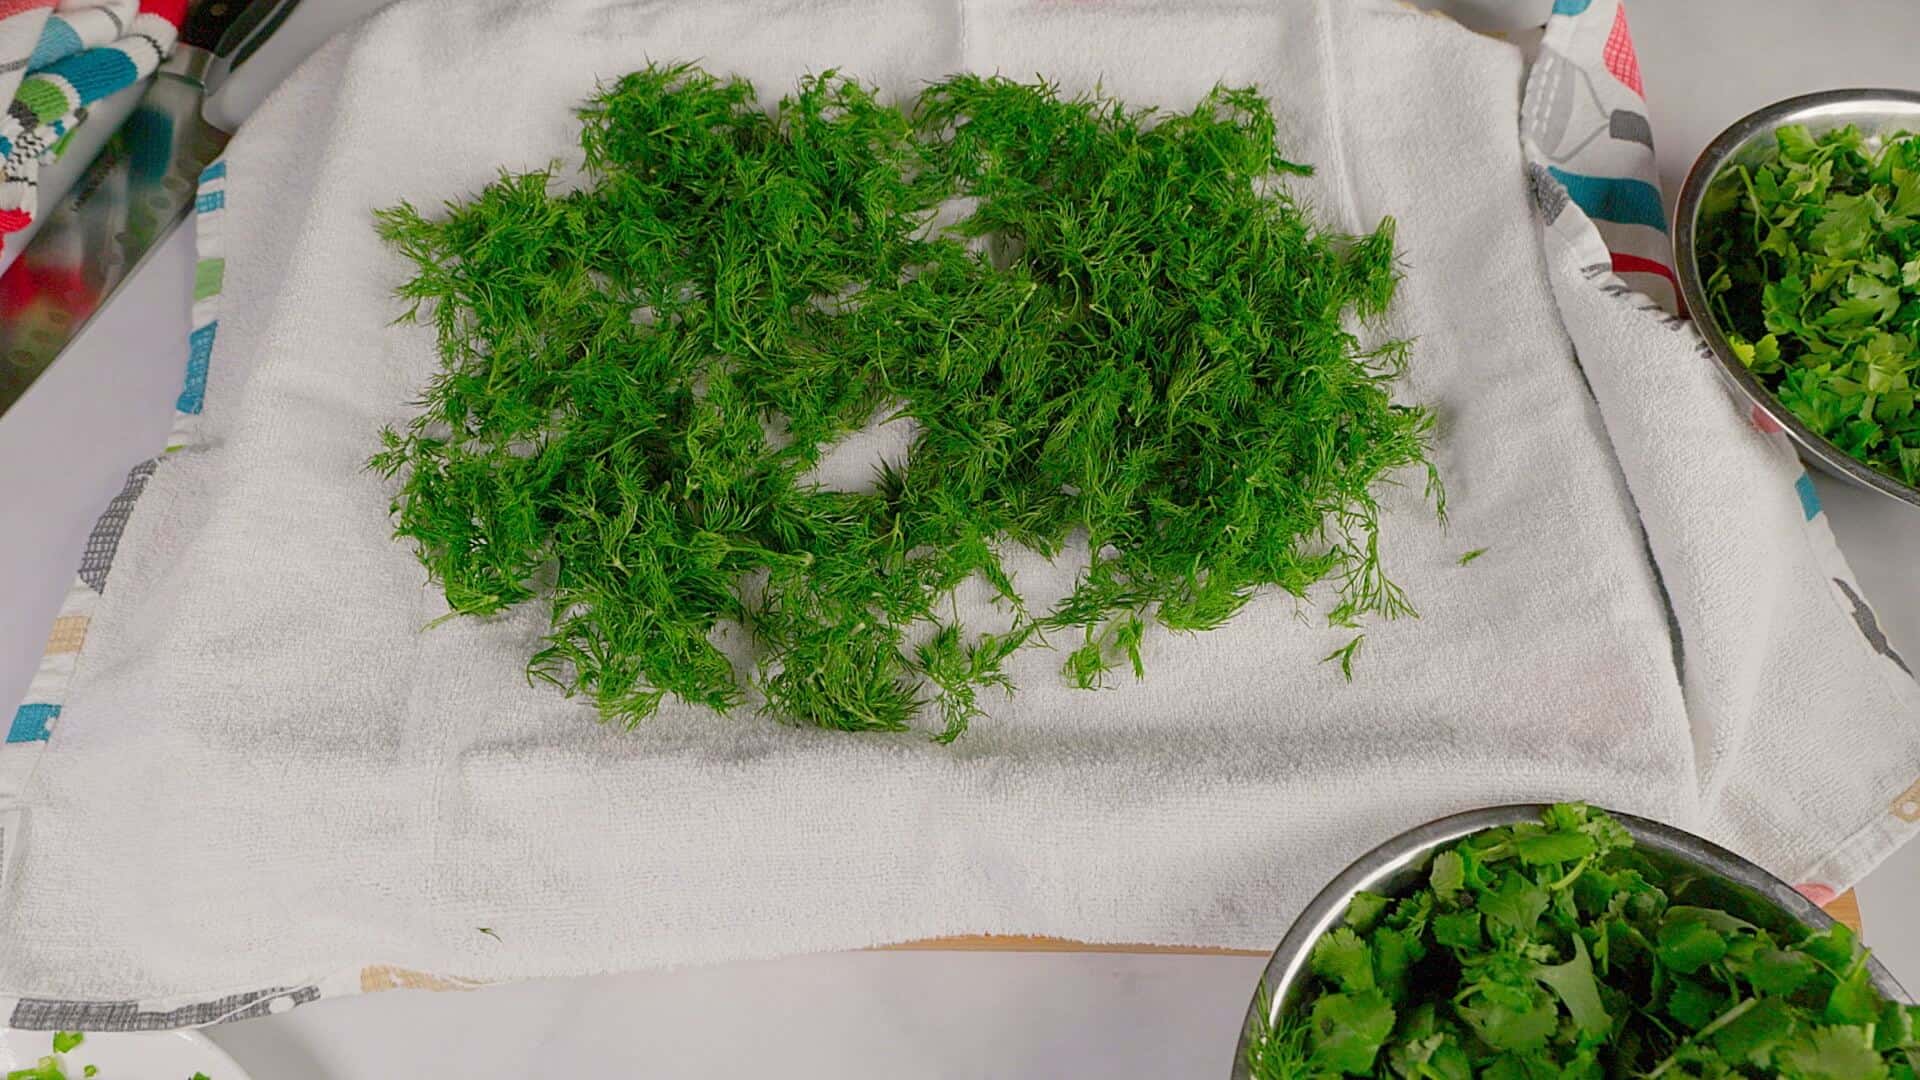 Rinsed herbs spread out on a towel.